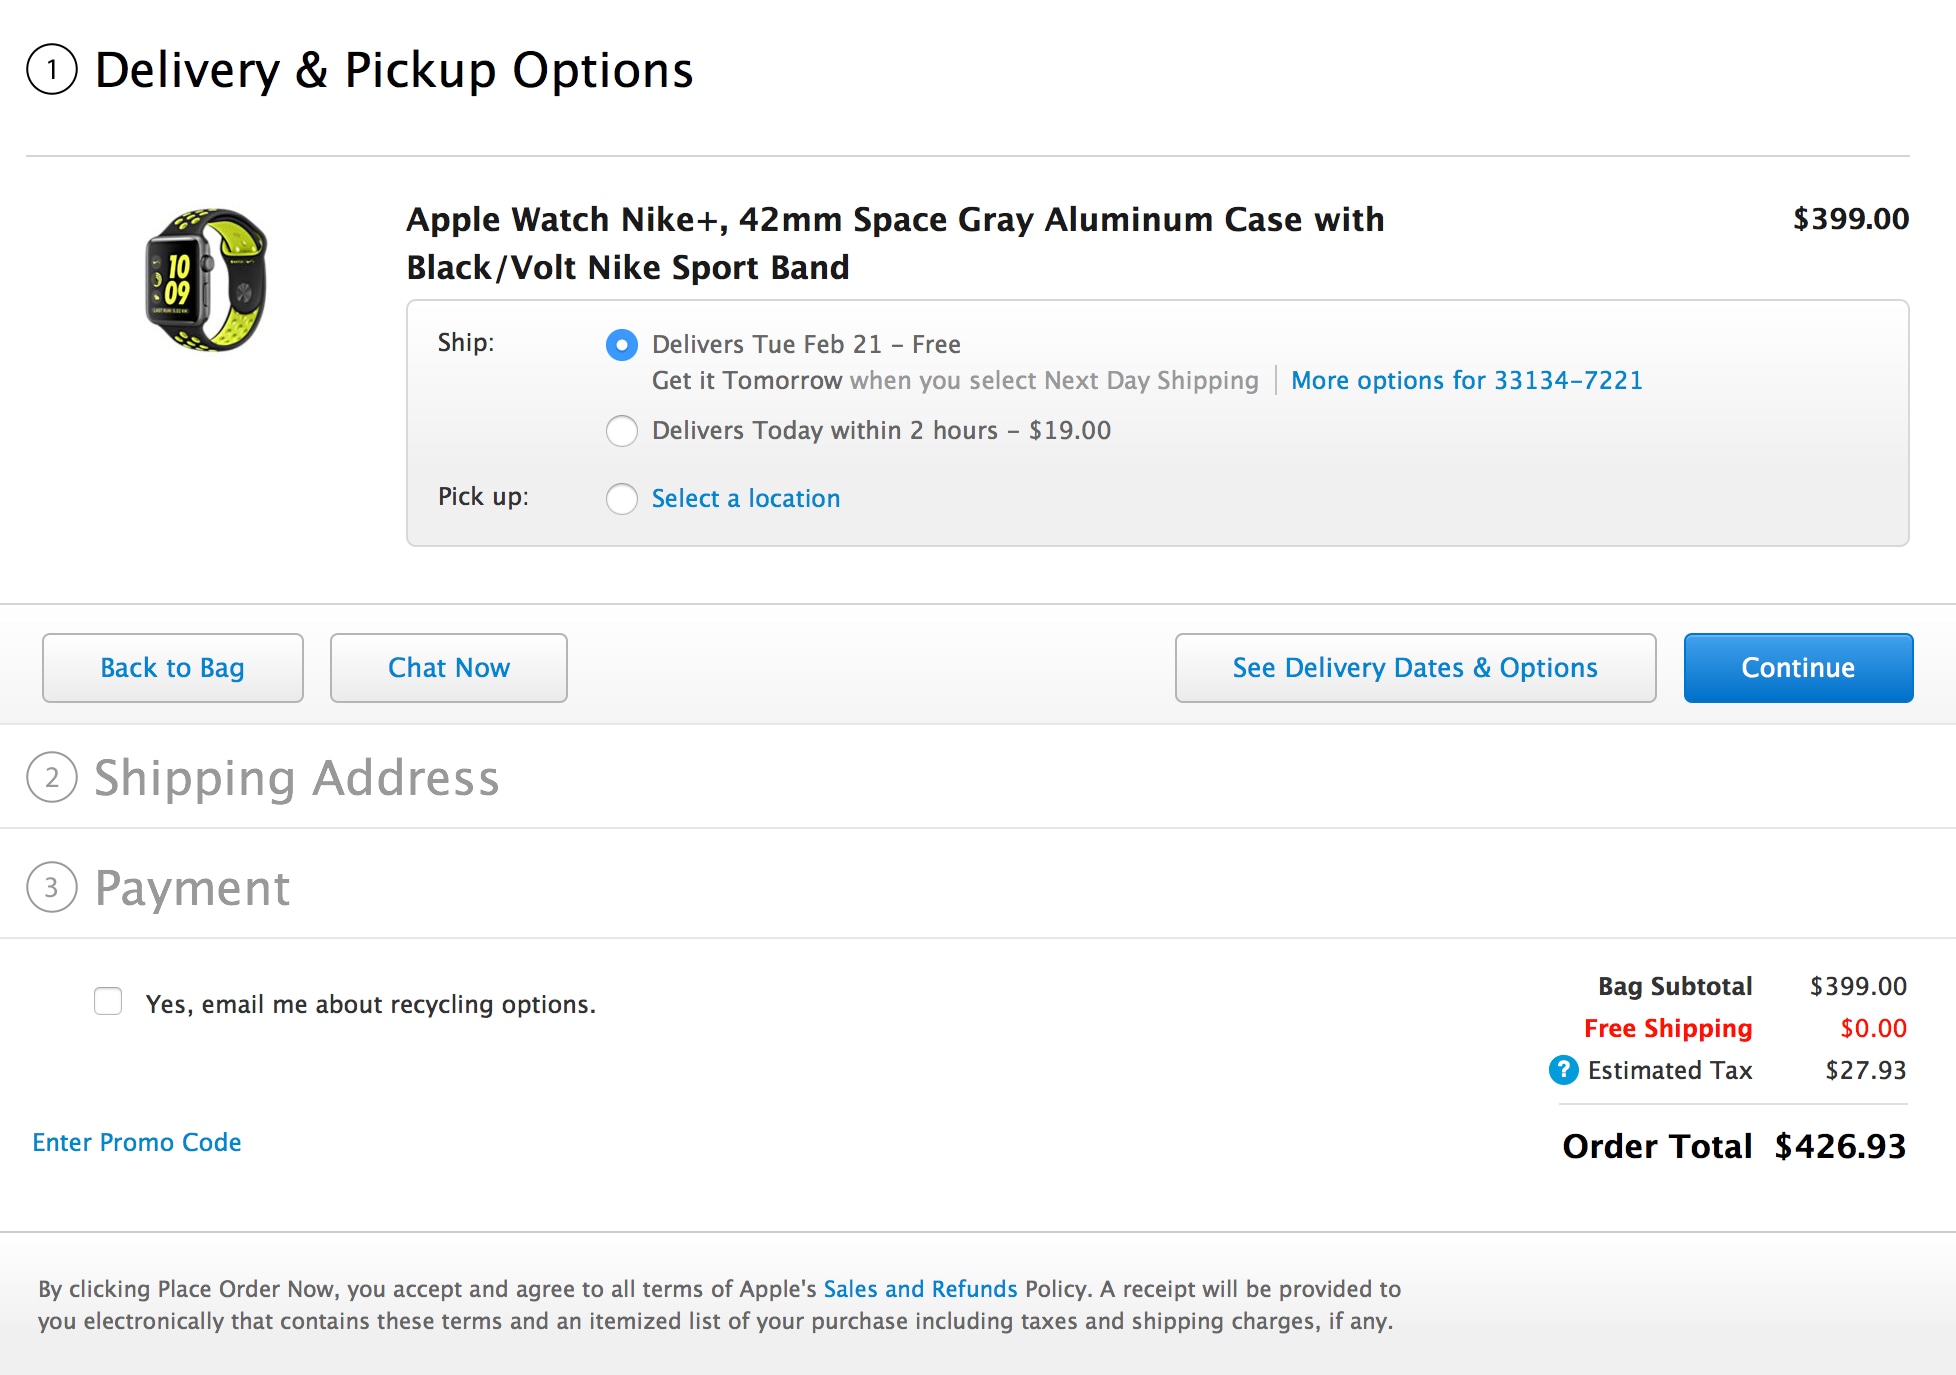 How to buy an Apple product abroad through the company's online store